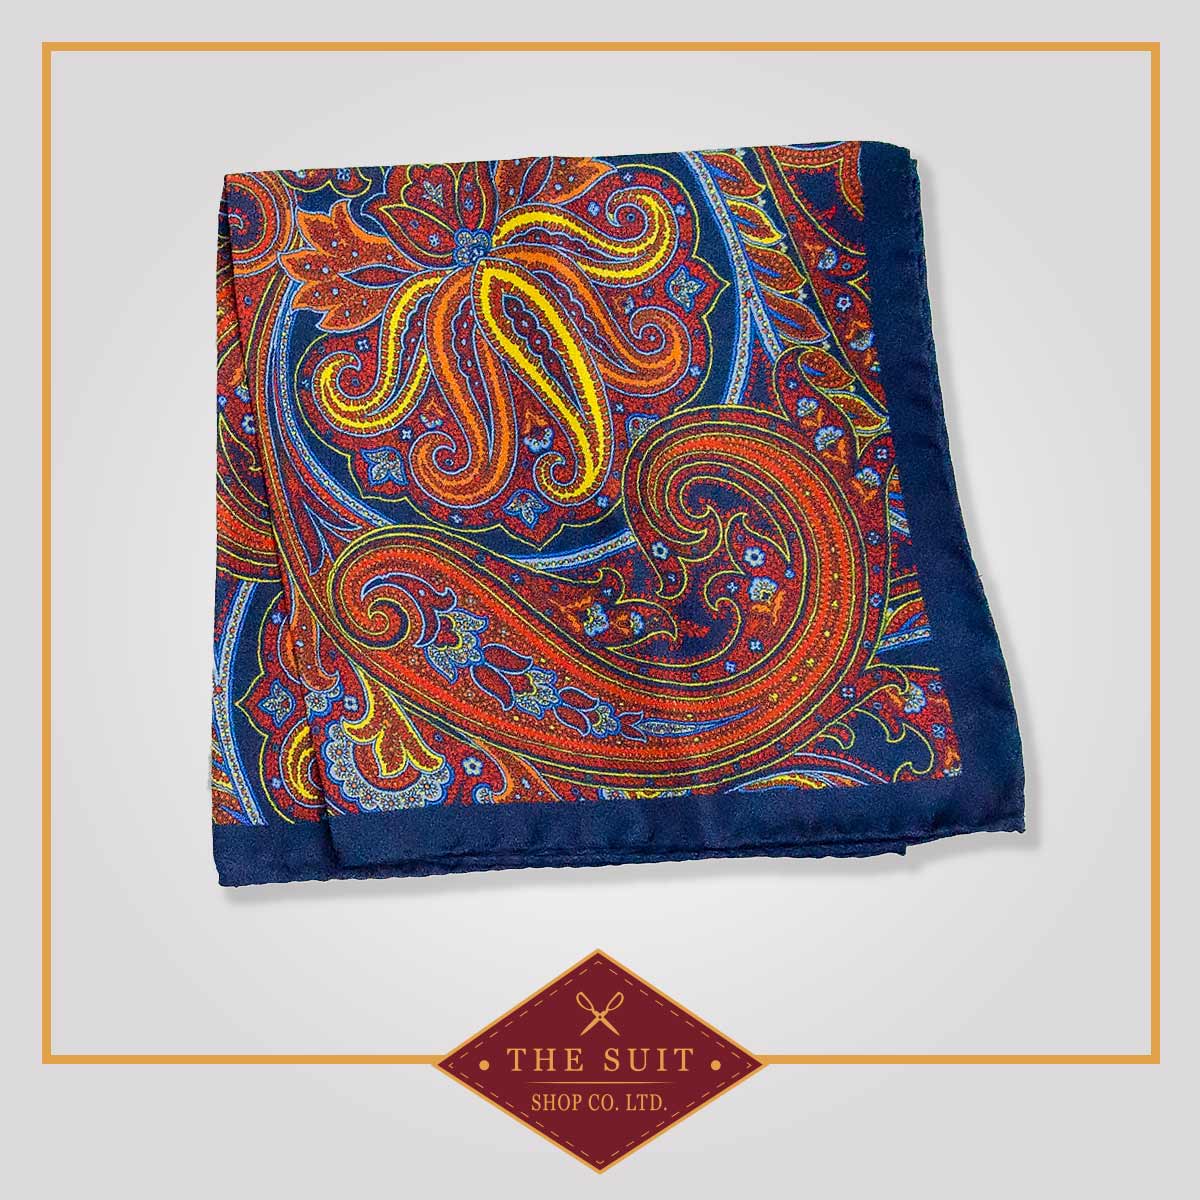 Tia Maria and Deep Cove Paisley Patterned Pocket Square